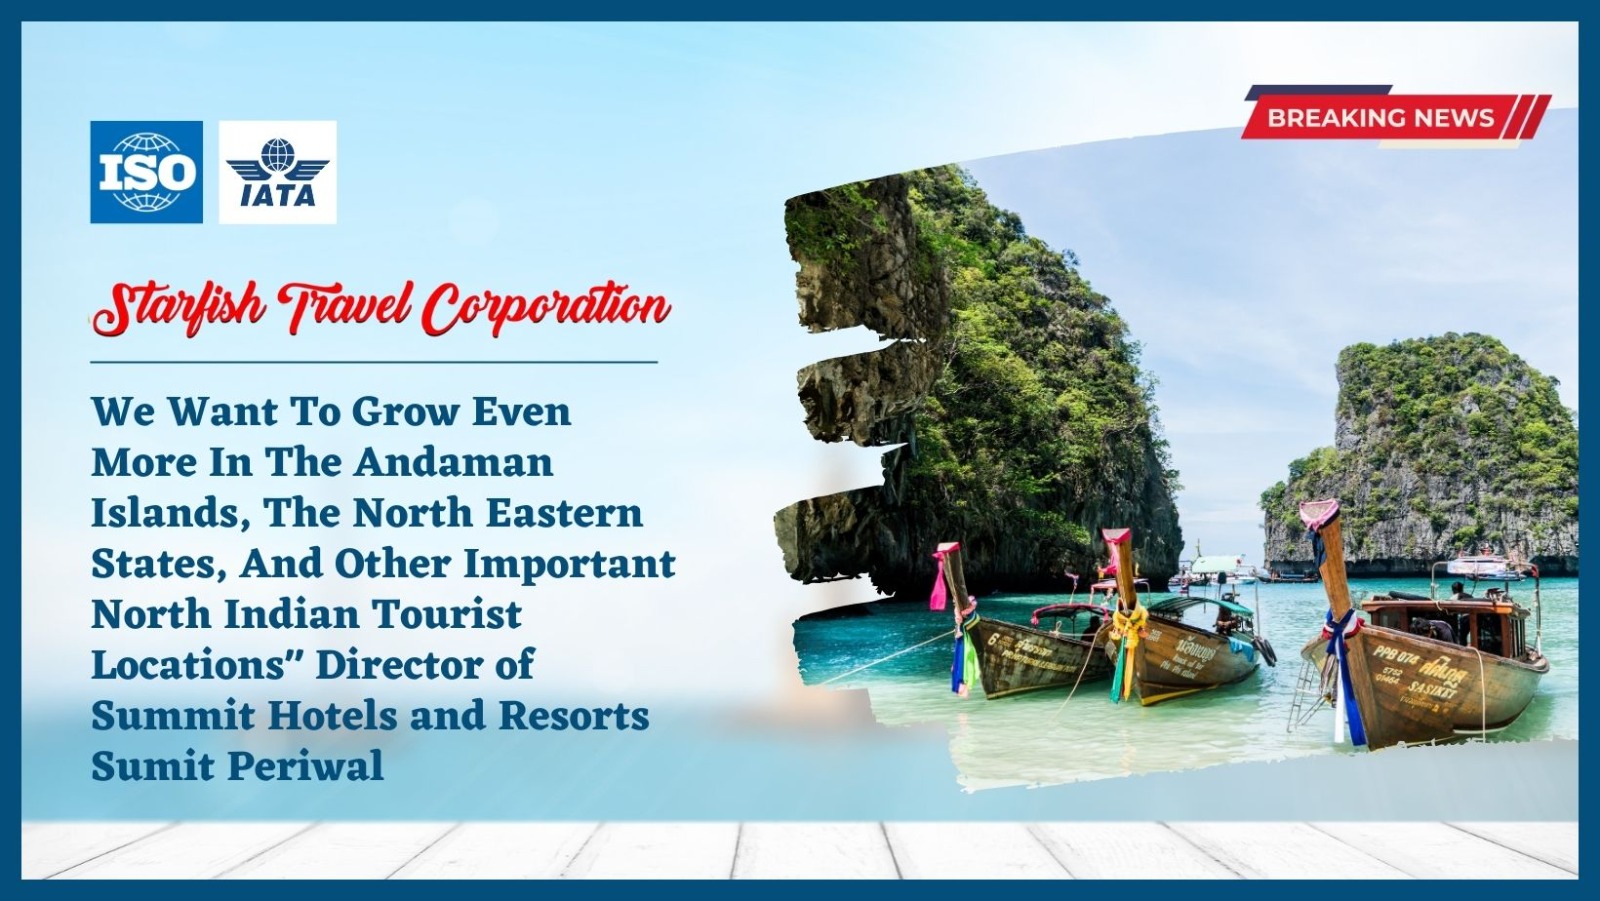 You are currently viewing We Want To Grow Even More In The Andaman Islands, The North Eastern States, And Other Important North Indian Tourist Locations” Director of Summit Hotels and Resorts Sumit Periwal